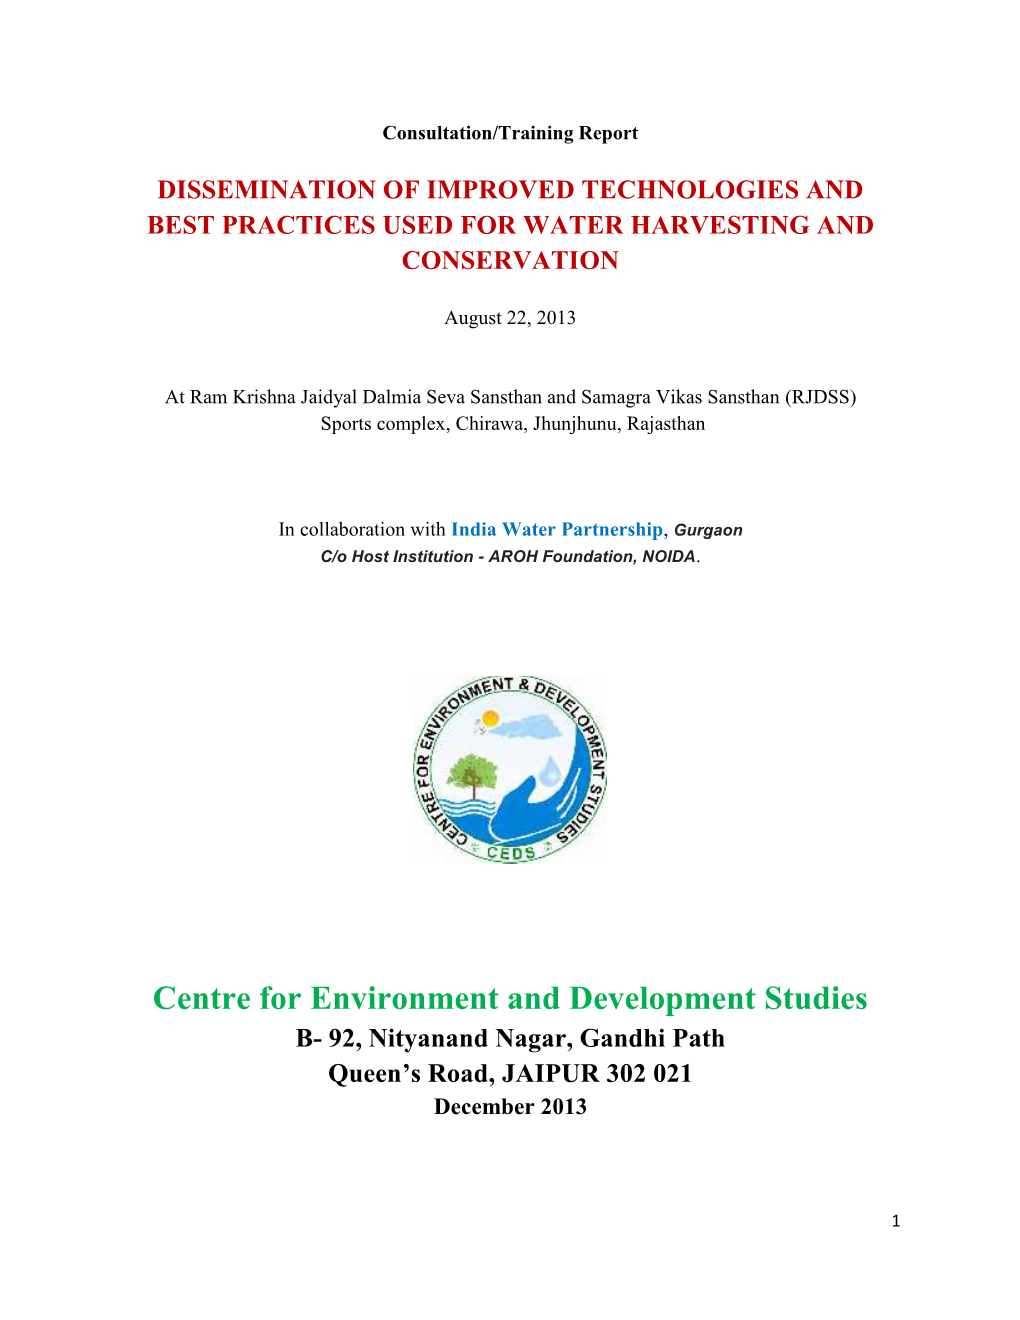 Report of Consultation on Dissemination of Improved